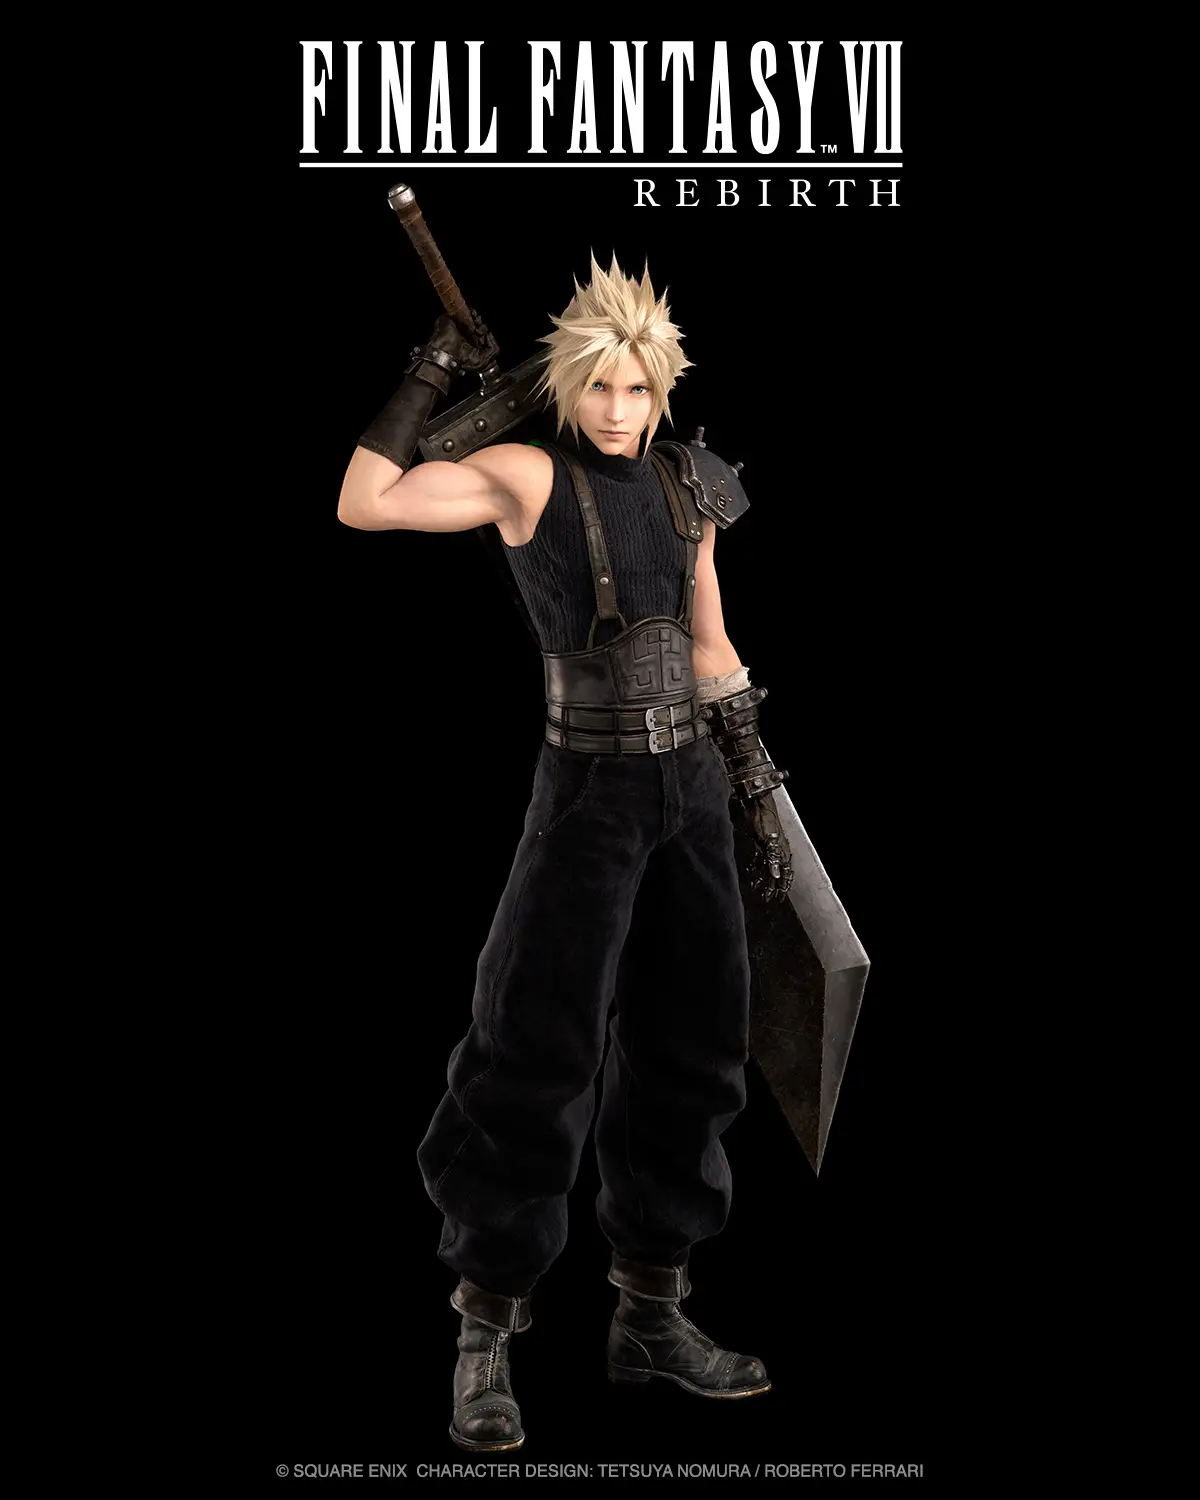 FINAL FANTASY VII on X: Pre-order the Final Fantasy VII Rebirth  Collector's Edition, featuring a 19 inch Sephiroth statue, from the Square  Enix Store while stocks last:  Are you ready for